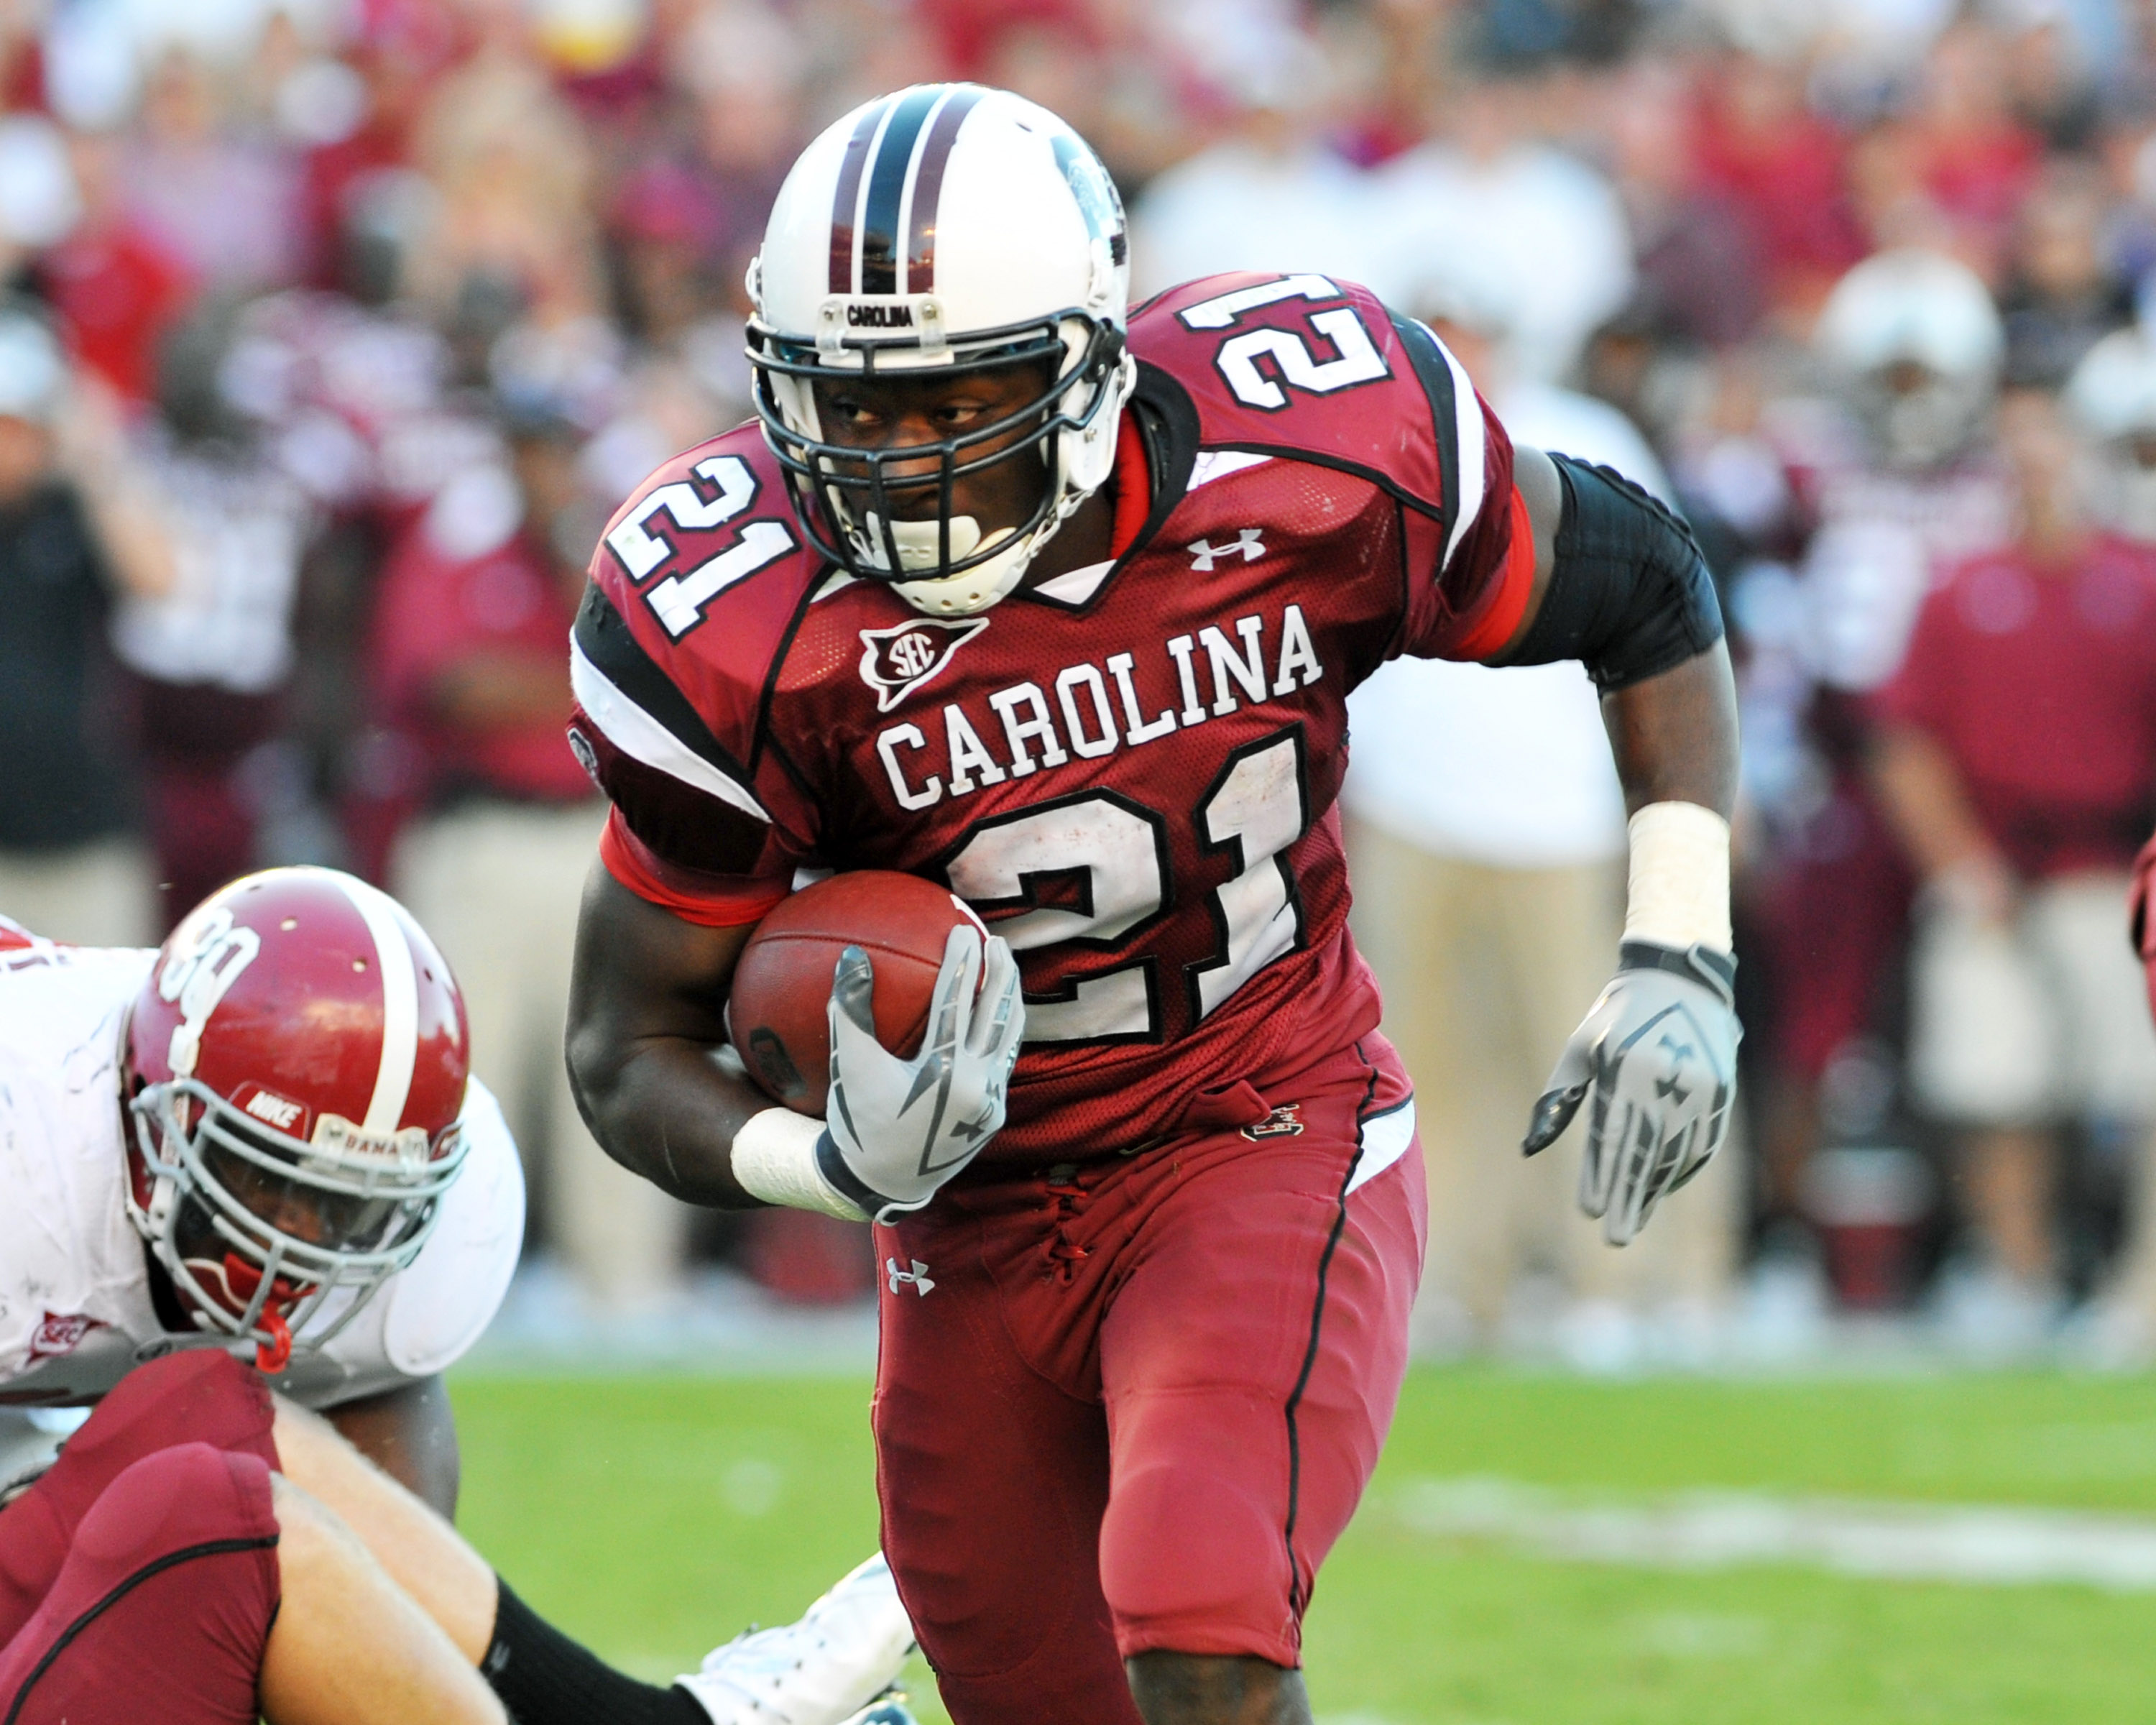 COLUMBIA, SC - OCTOBER 9: Running back Marcus Lattimore #21 of the South Carolina Gamecocks rushes upfield against the Alabama Crimson Tide October 9, 2010 at Williams-Brice Stadium in Columbia, South Carolina.  (Photo by Al Messerschmidt/Getty Images)